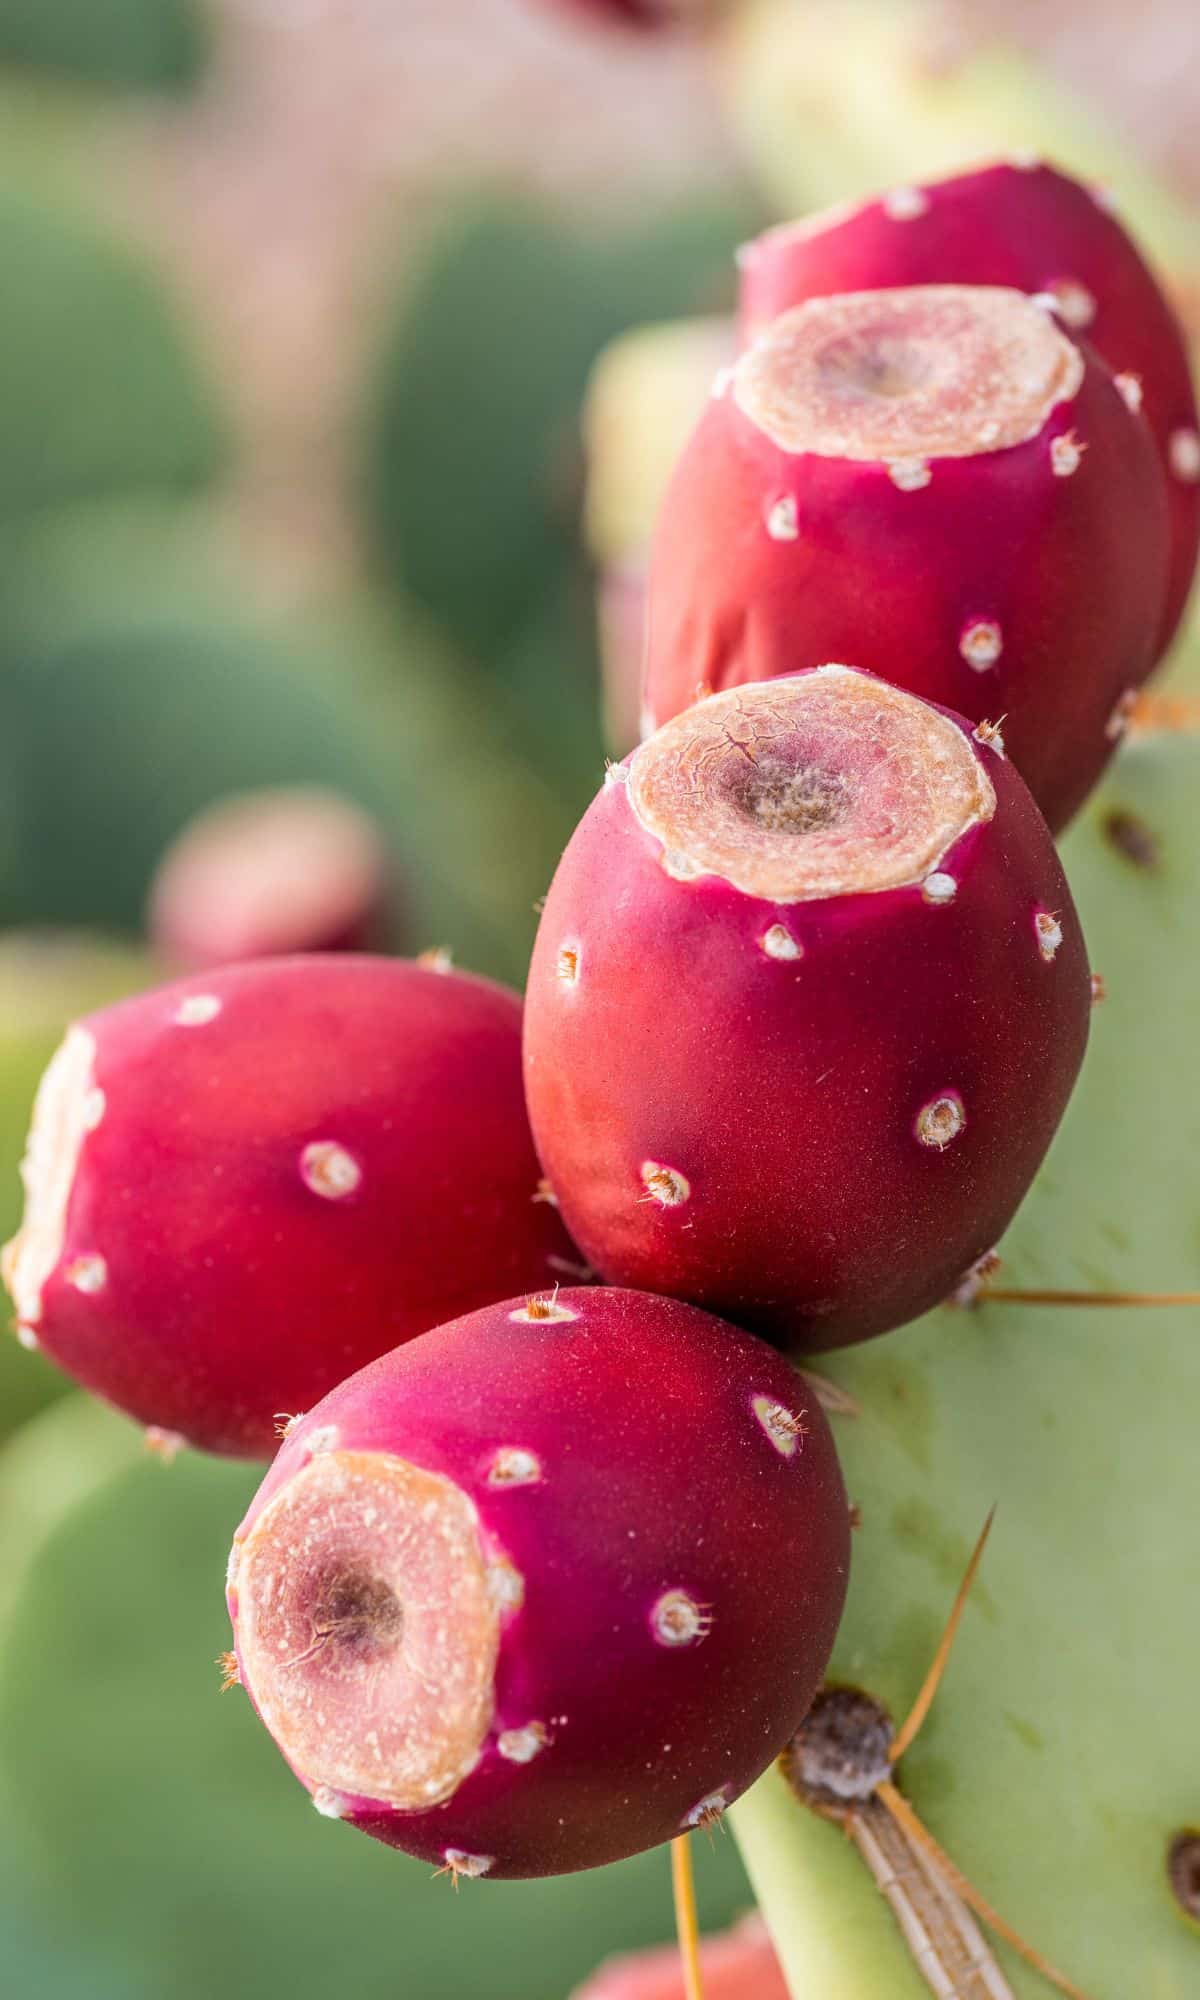 One of the best red fruits, prickly pear, outside growing on a cactus.